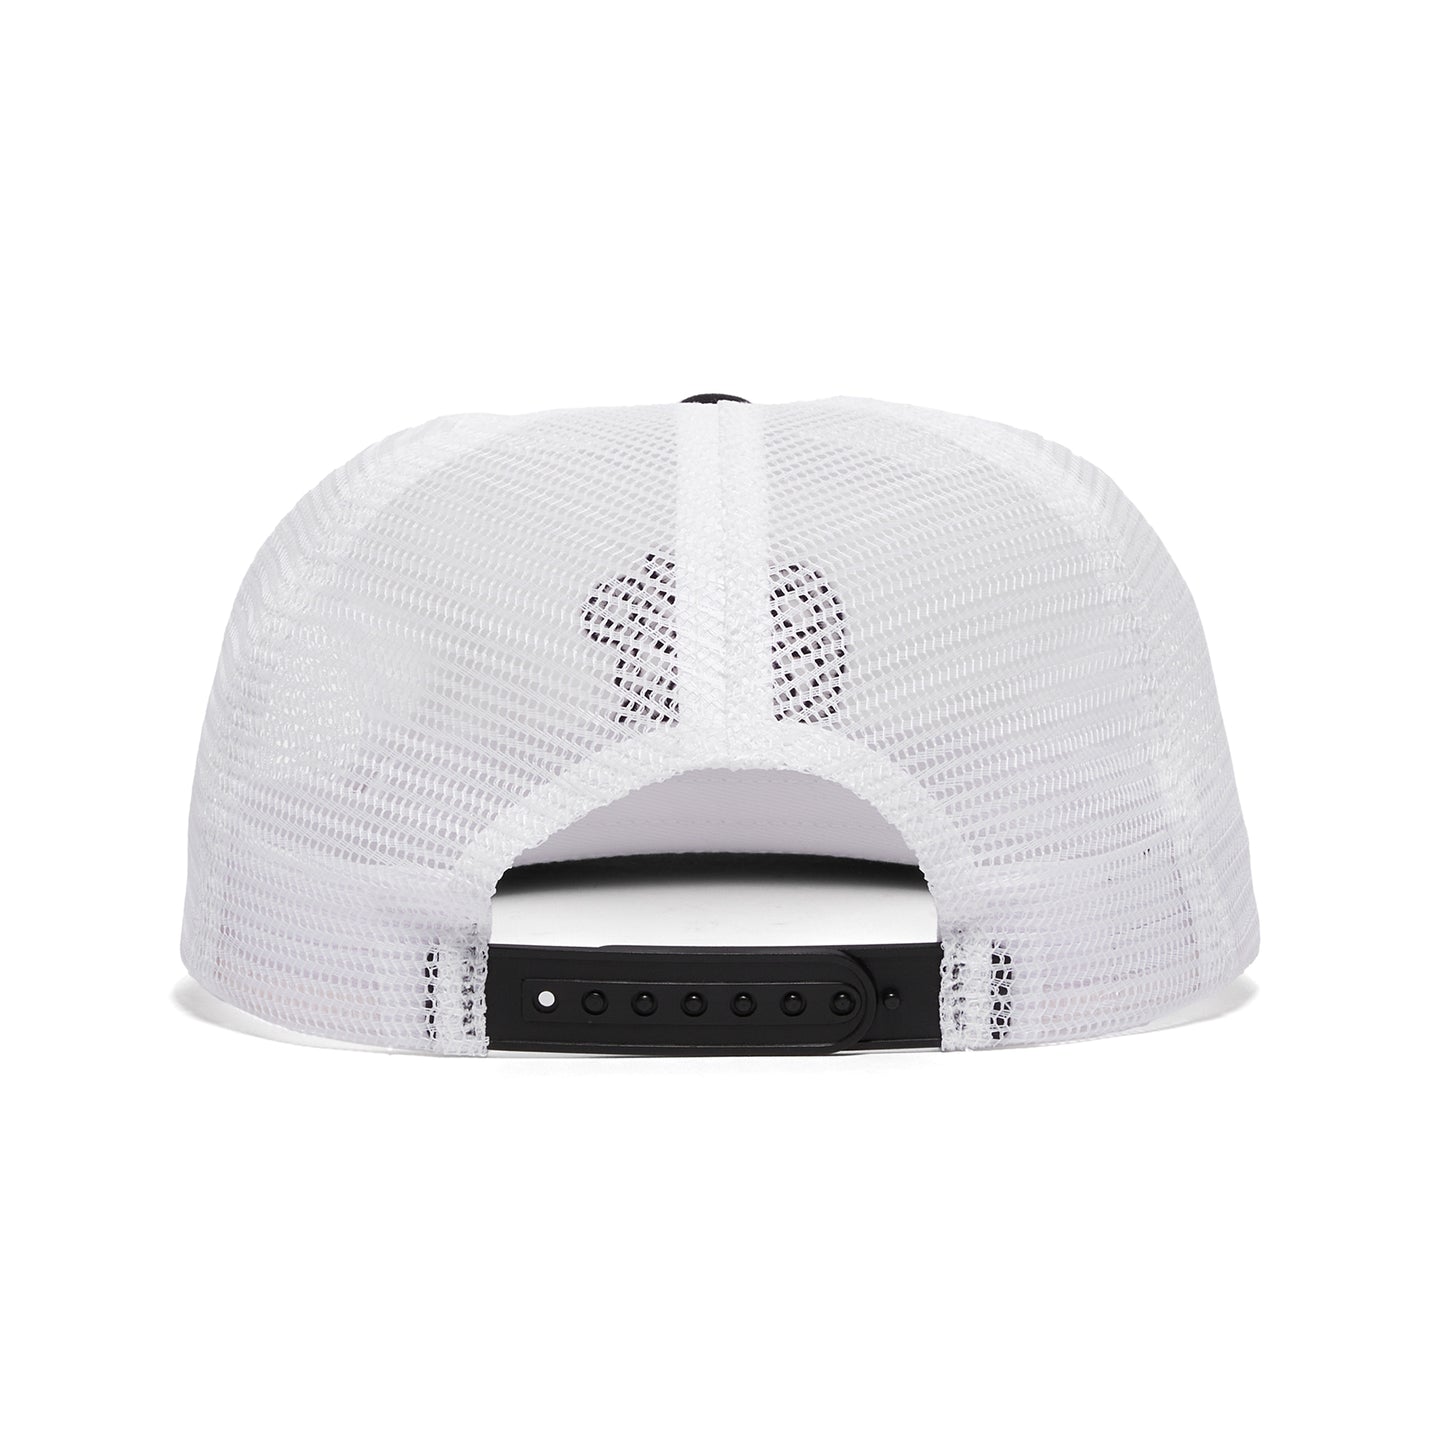 by Parra 1976 logo 5 panel hat (White)